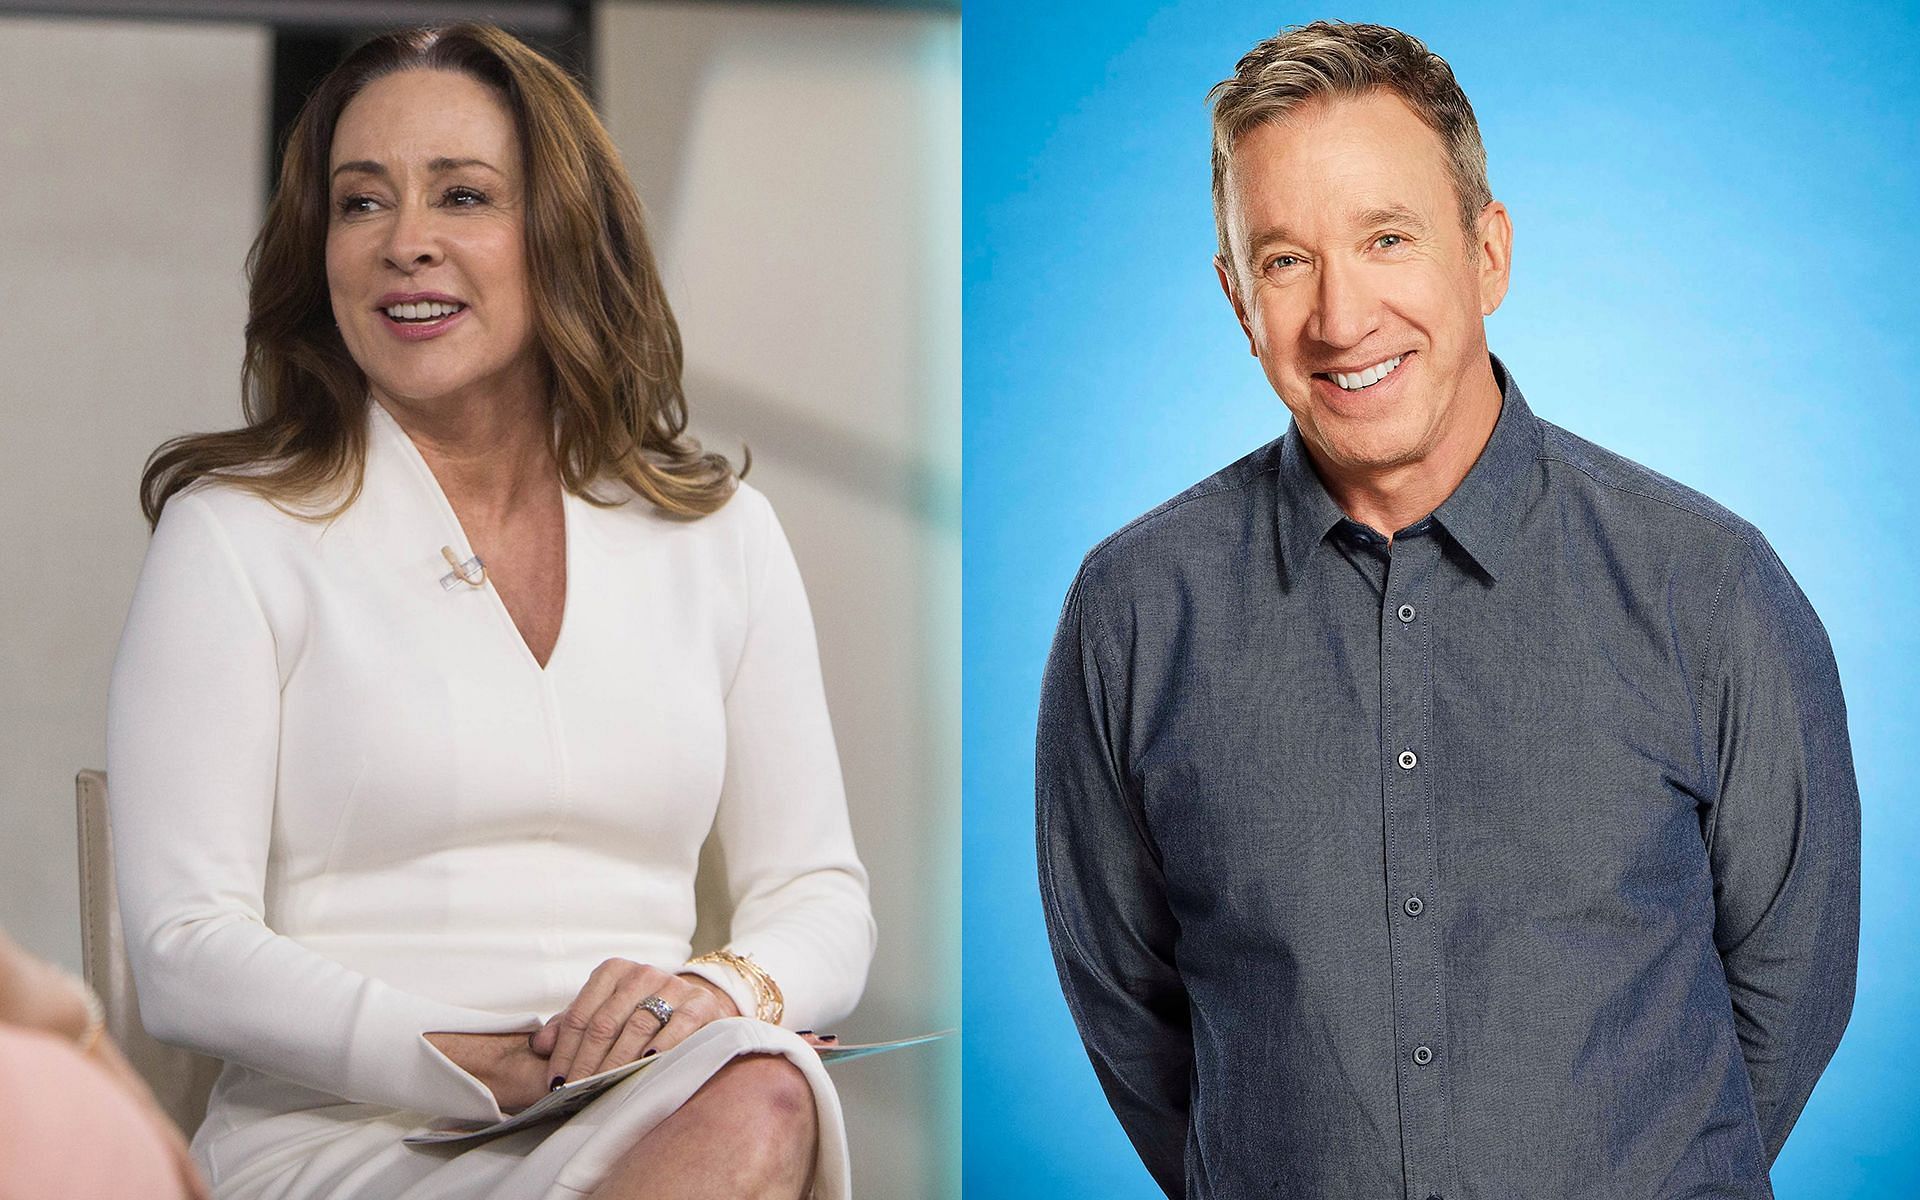 Patricia Heaton and Tim Allen (Images via Getty Images)